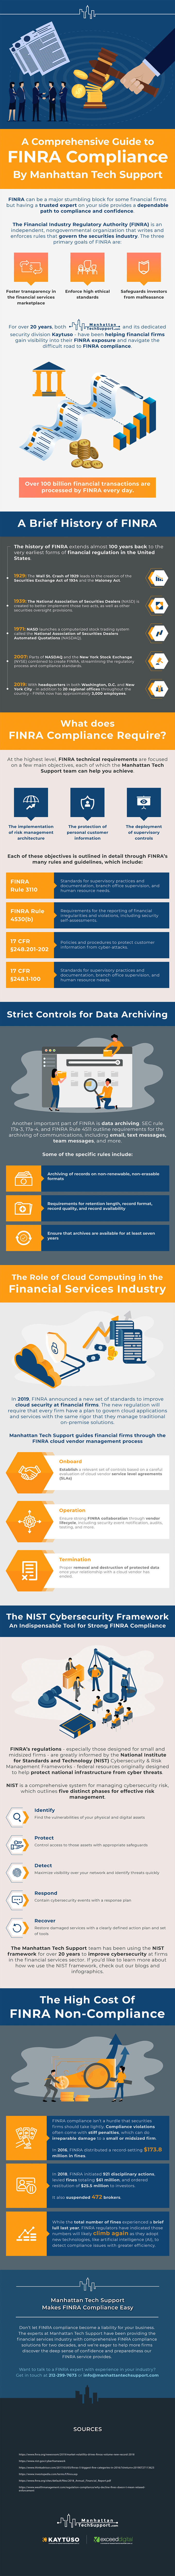 MSP Infographic (FINRA Compliance)_700px